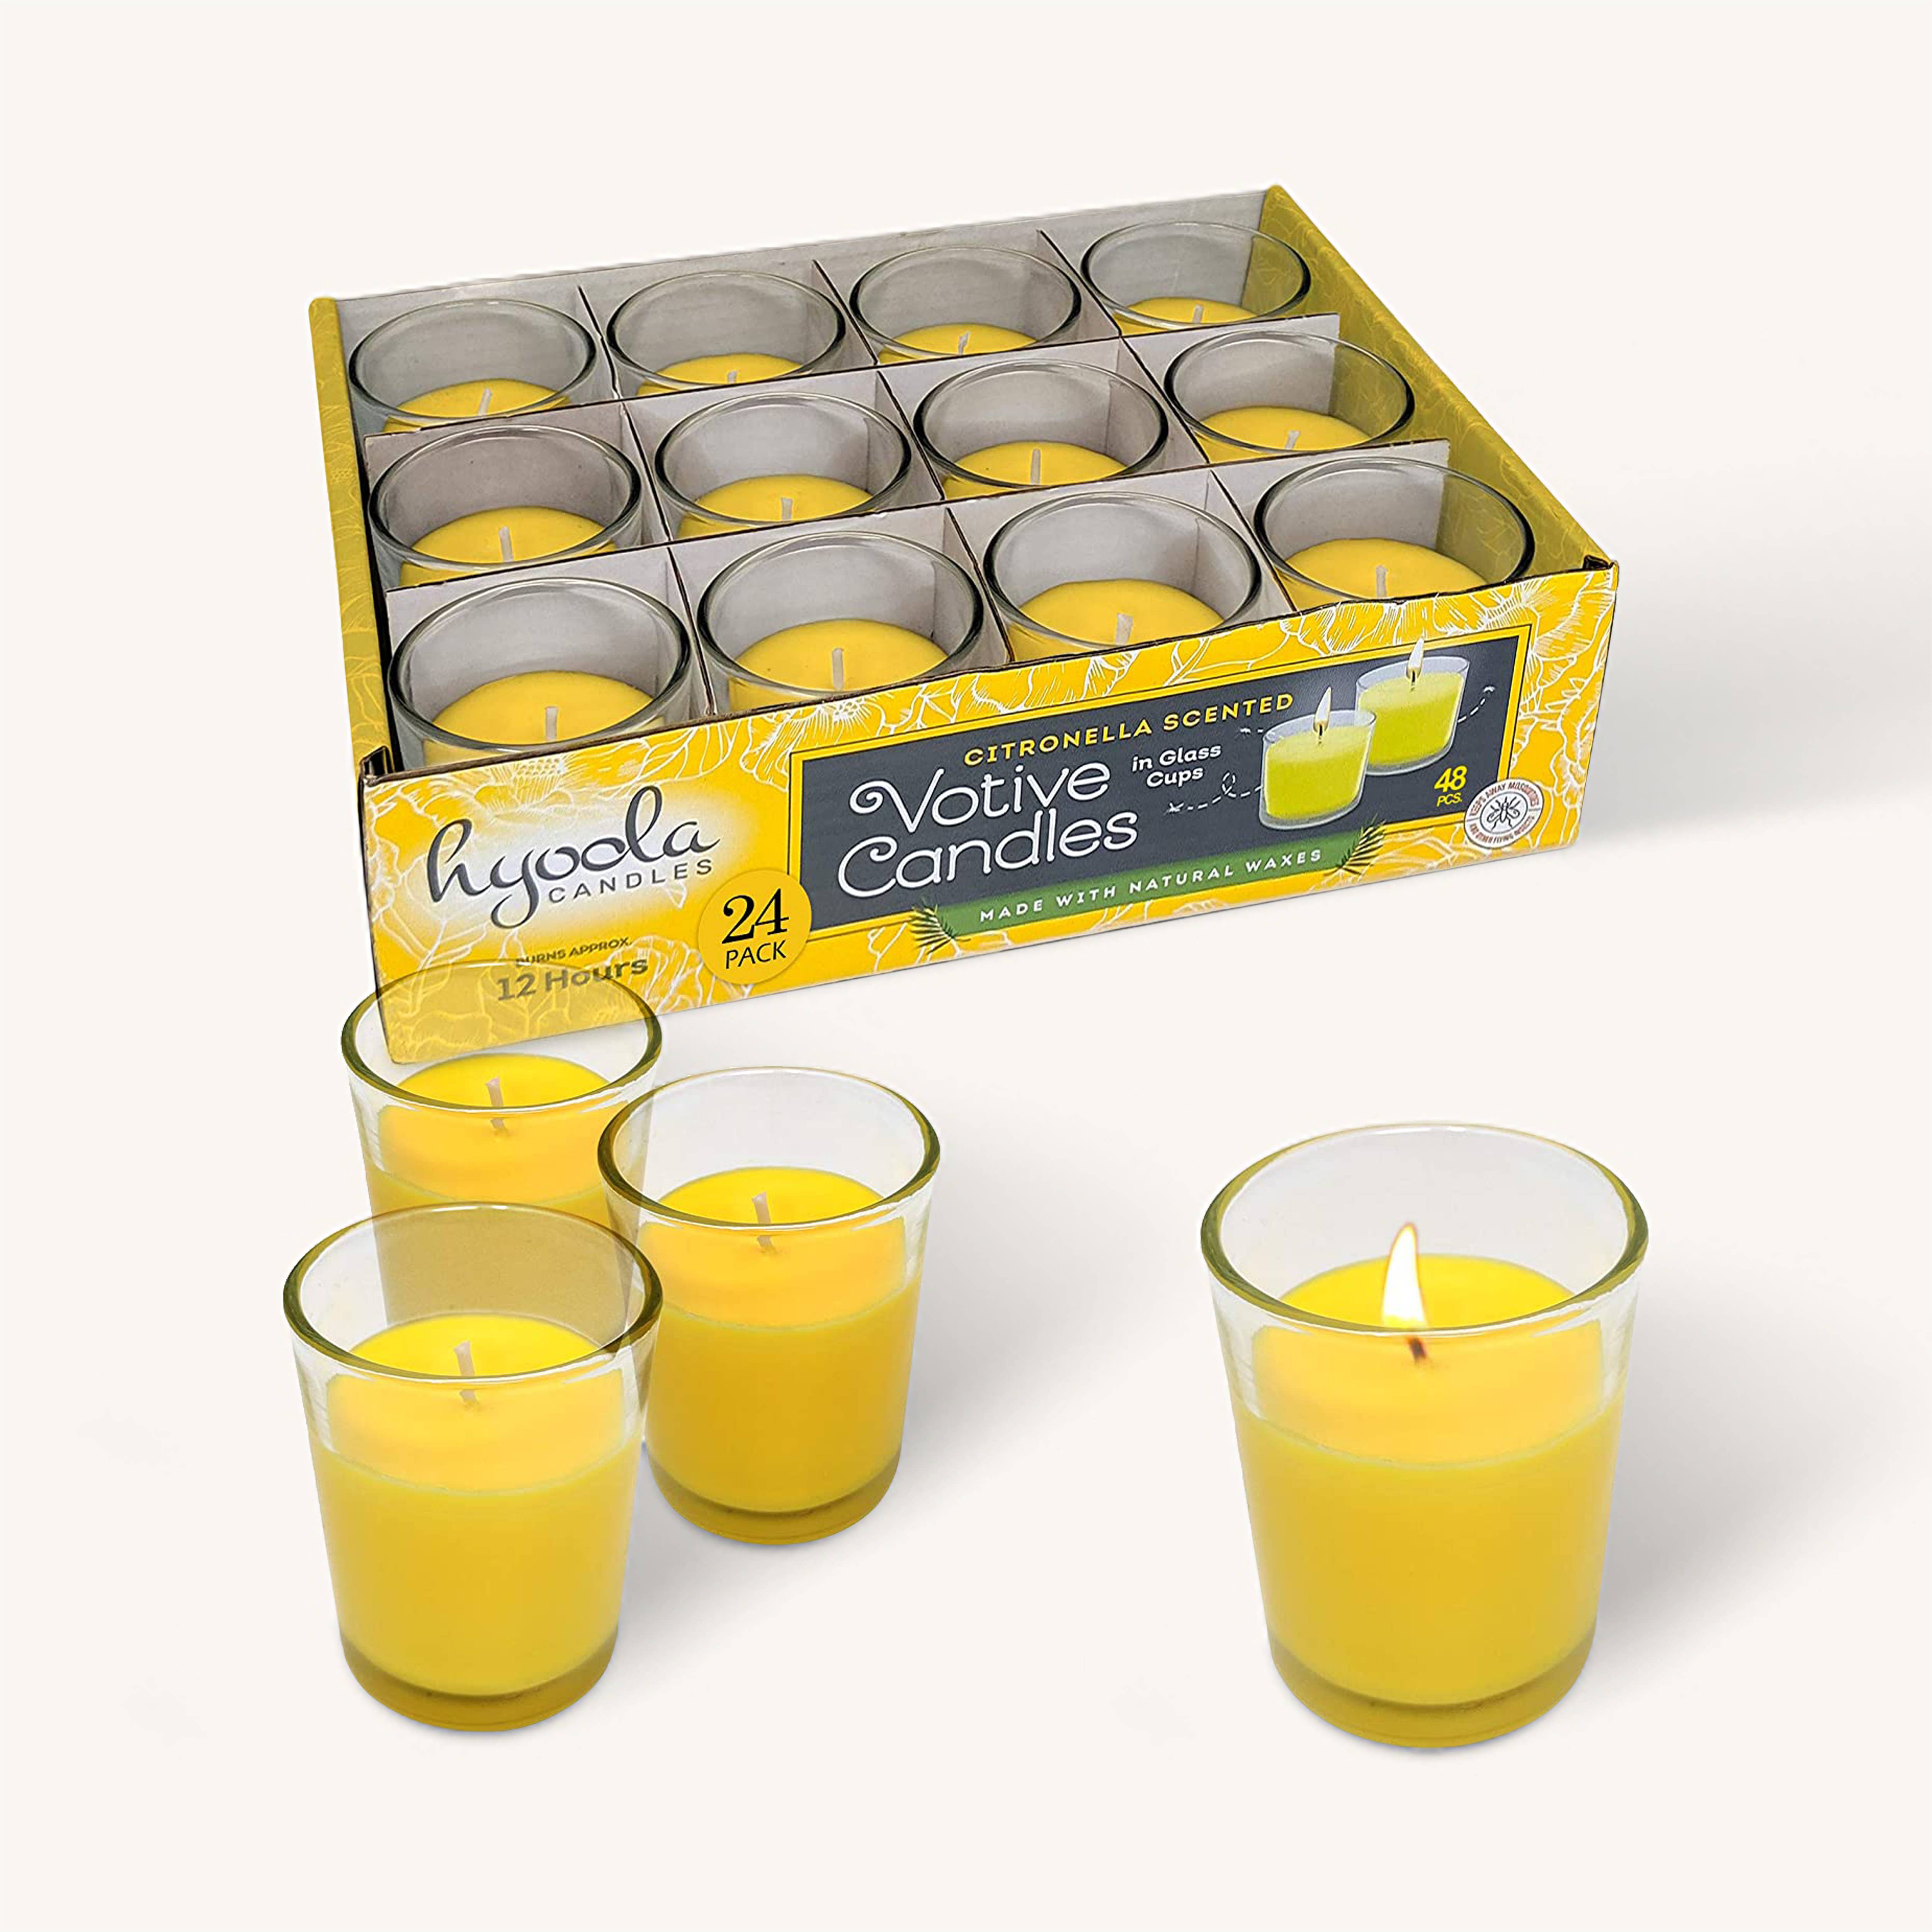 Citronella Votive Candle in Glass Cups - 15 Hours - 12 Pack